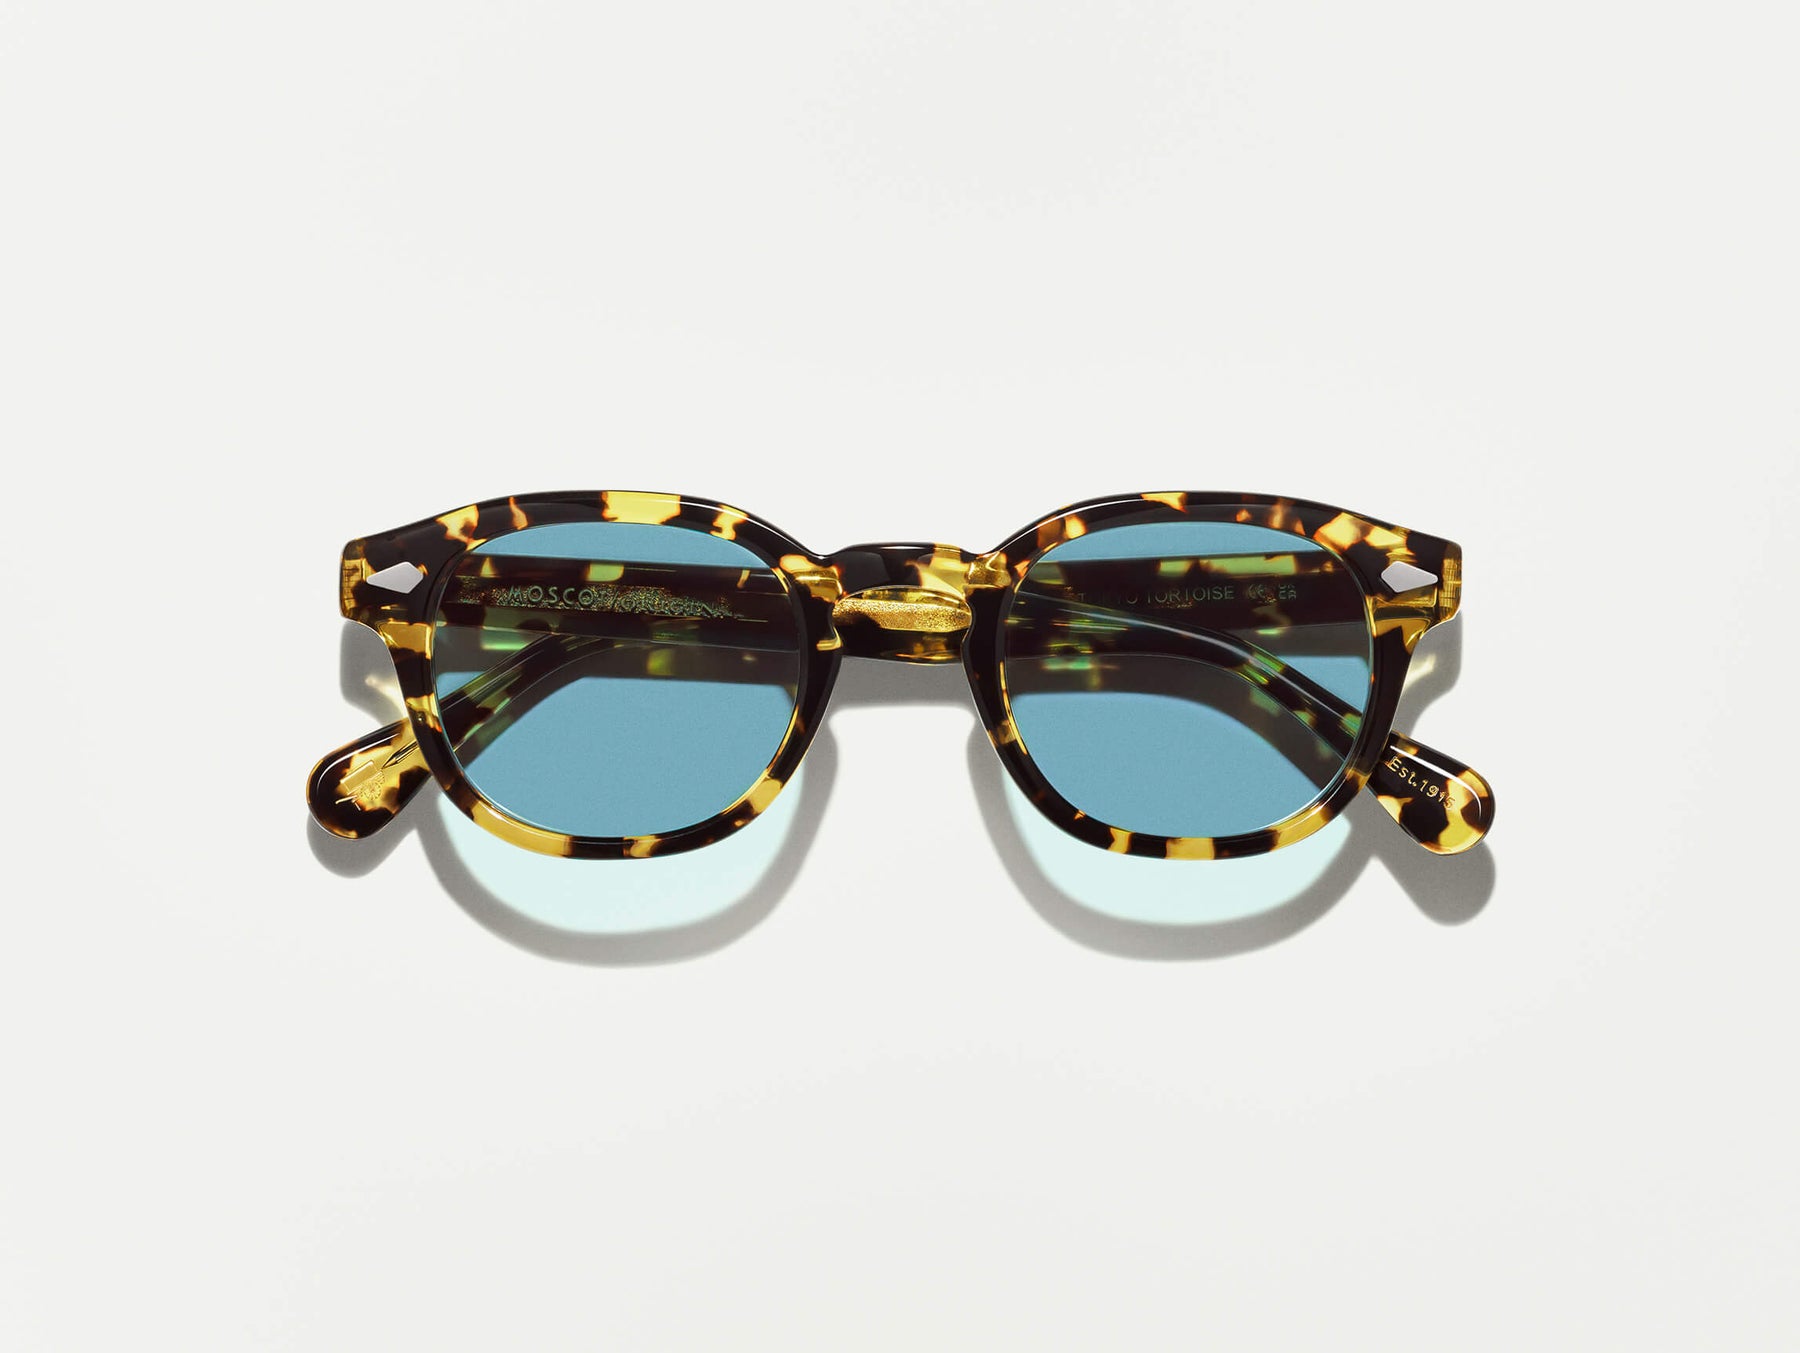 The LEMTOSH SUN in Tokyo Tortoise with Mineral Blue Glass Lenses